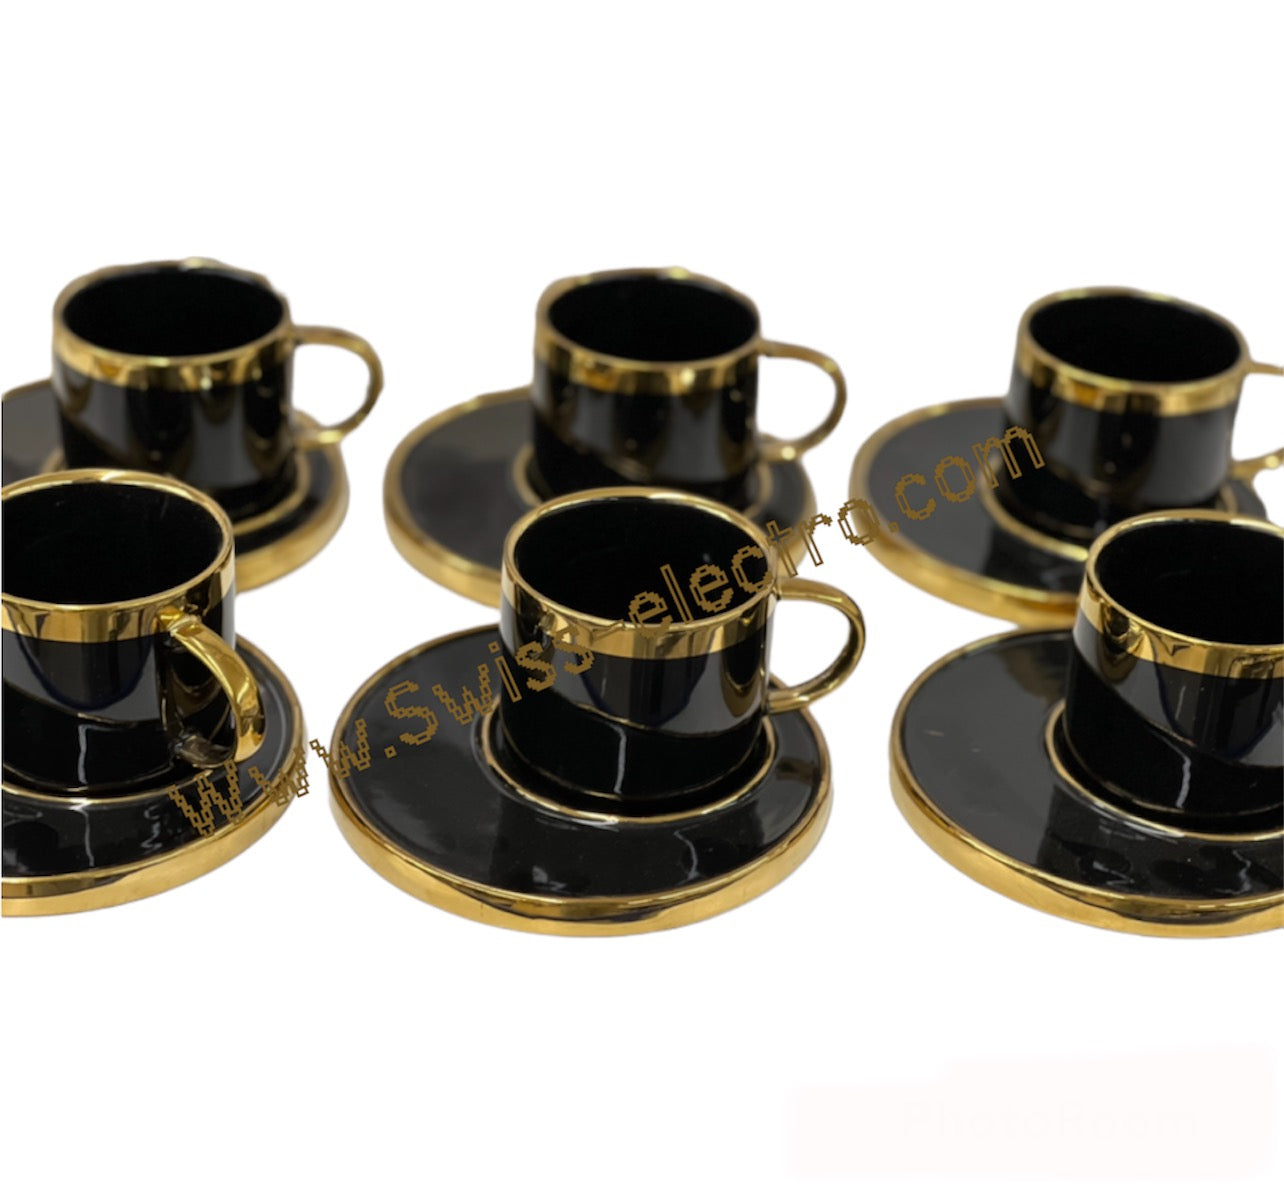 Gold border coffee cups